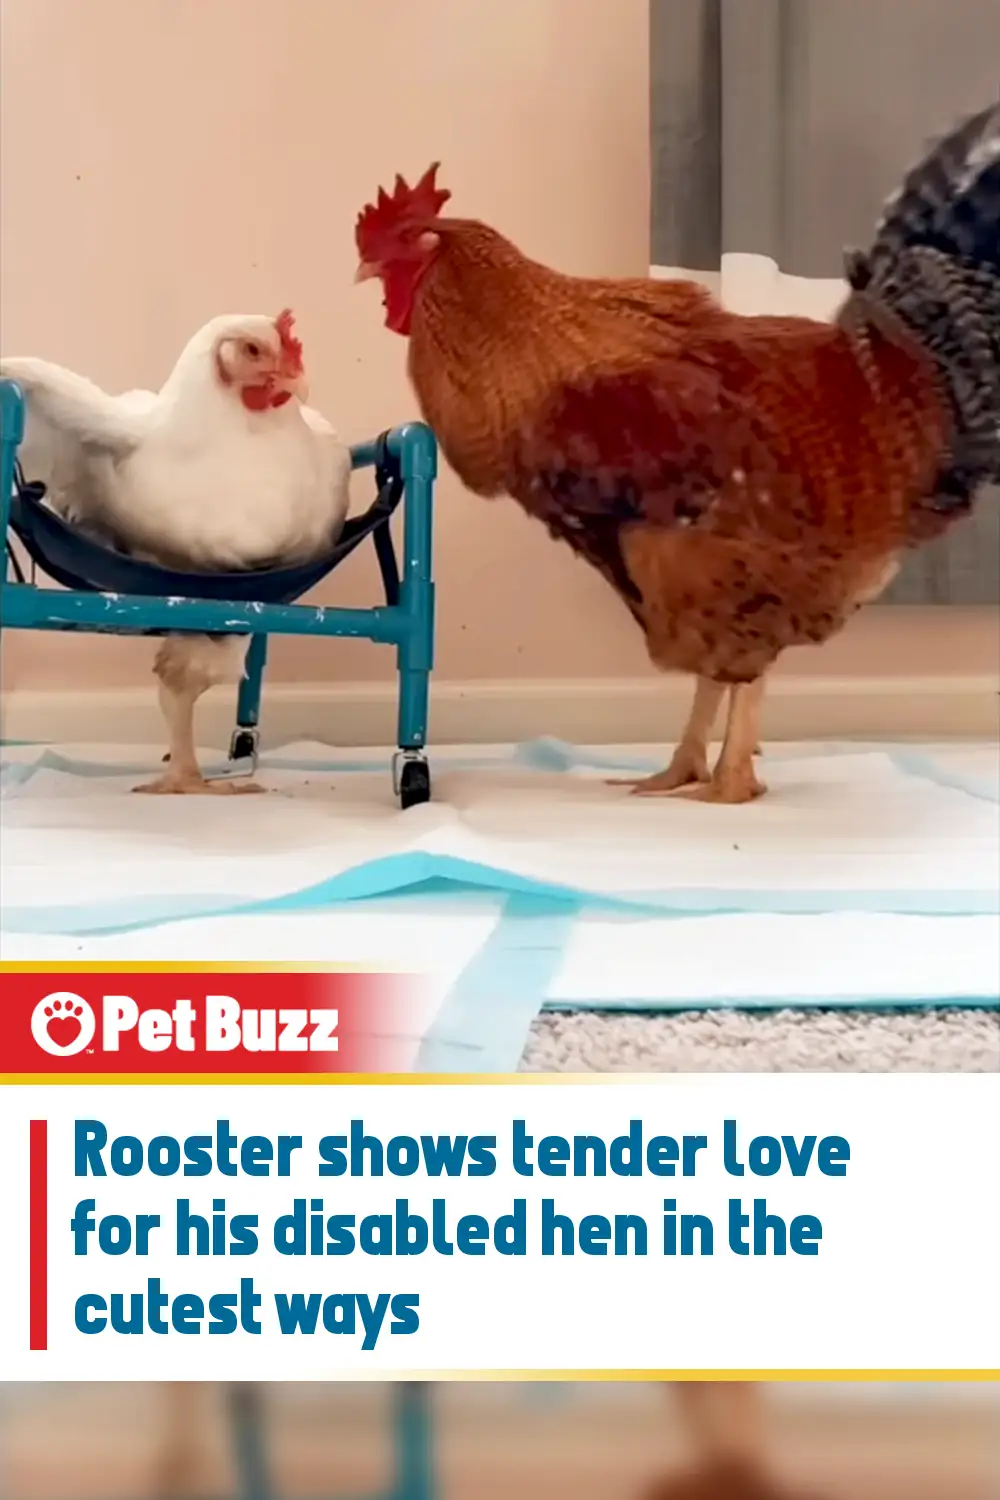 Rooster shows tender love for his disabled hen in the cutest ways